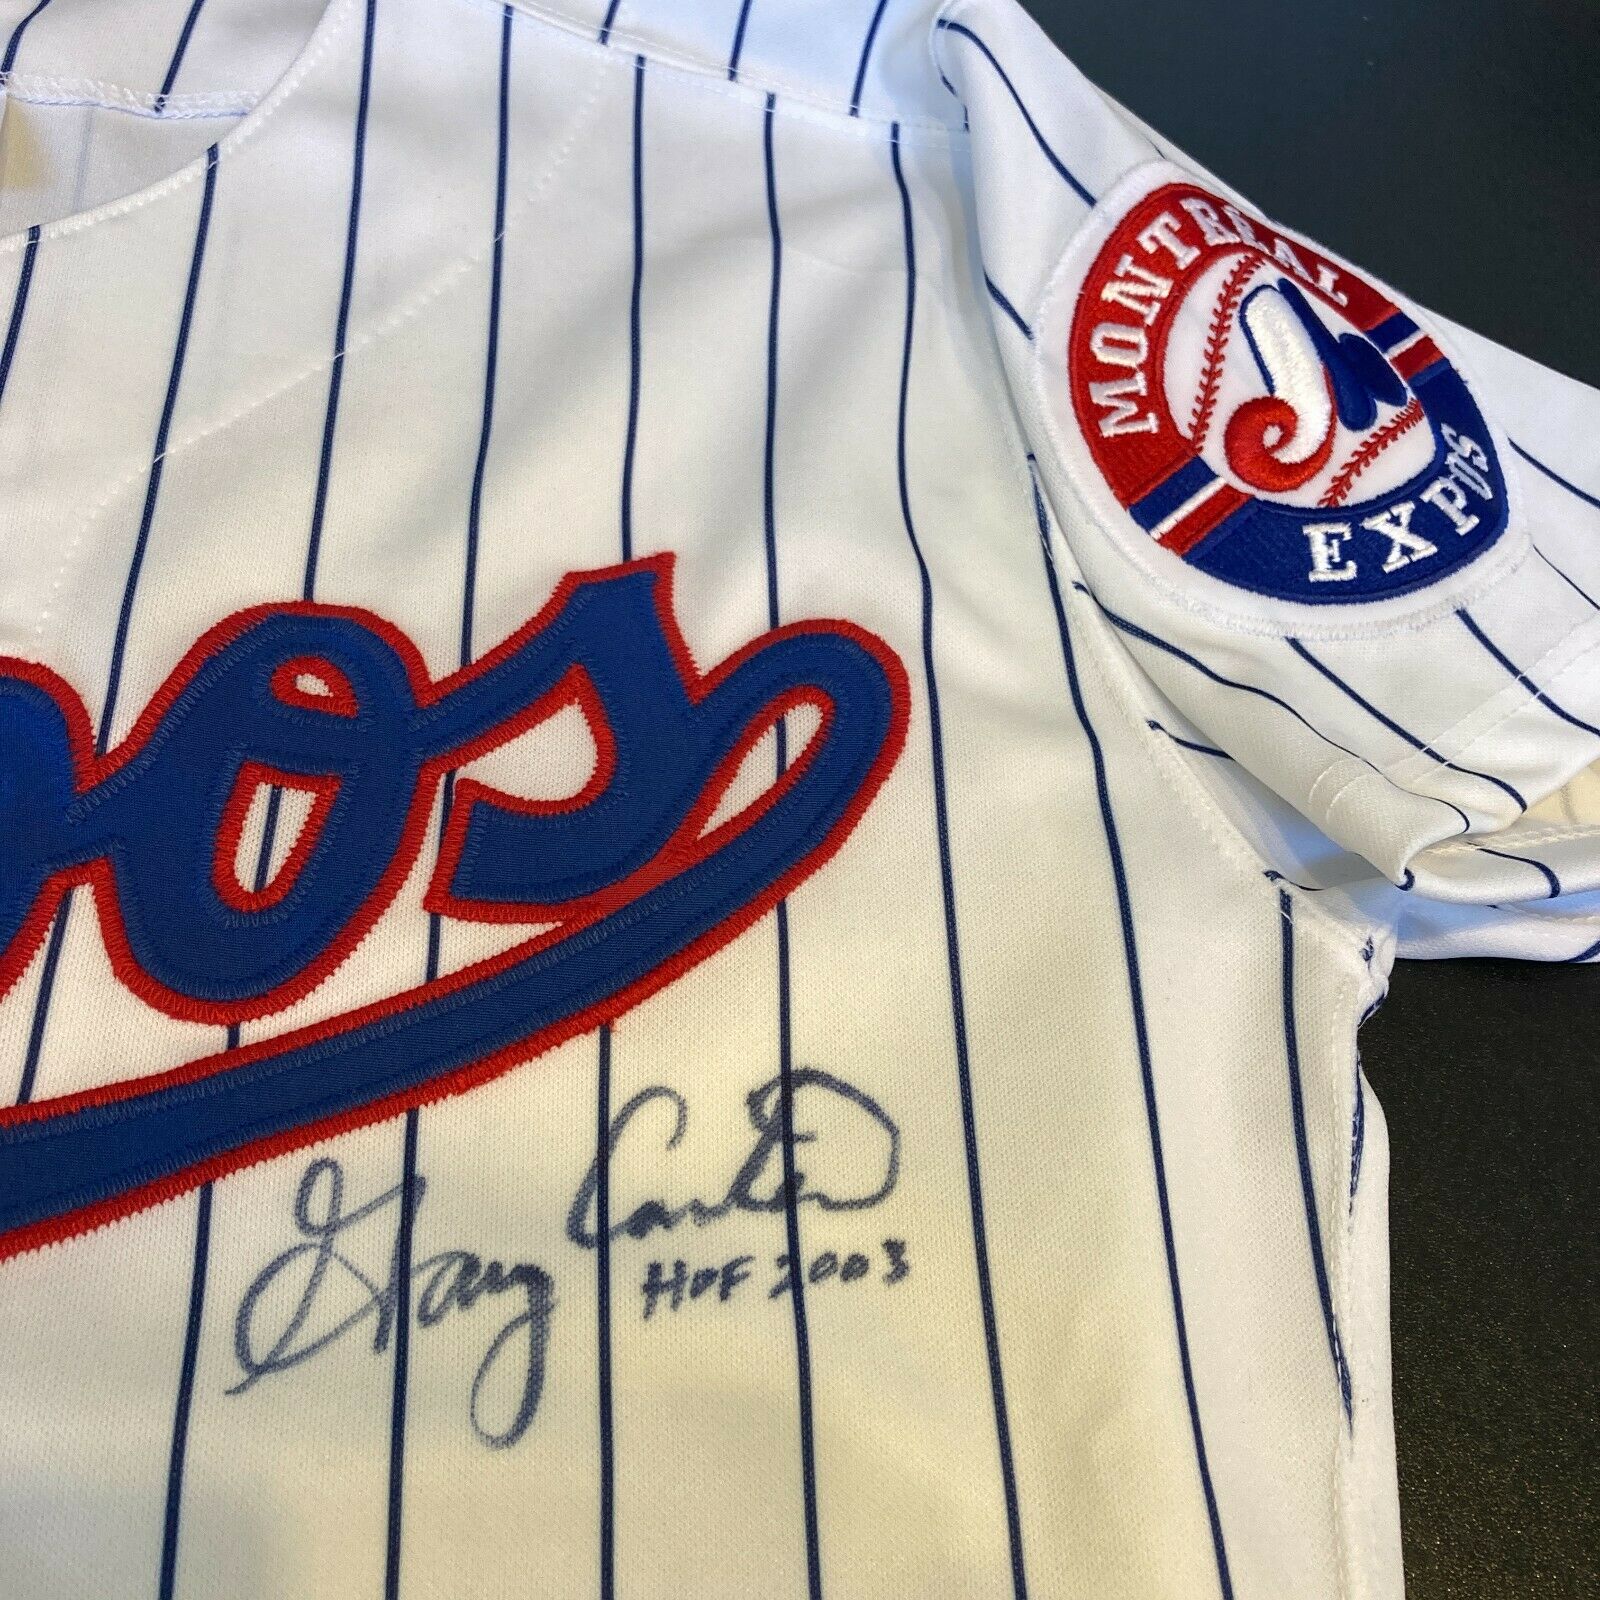 Gary Carter Montreal Expos Autographed Blue Cooperstown Collection Jersey  with HOF 2003 Inscription